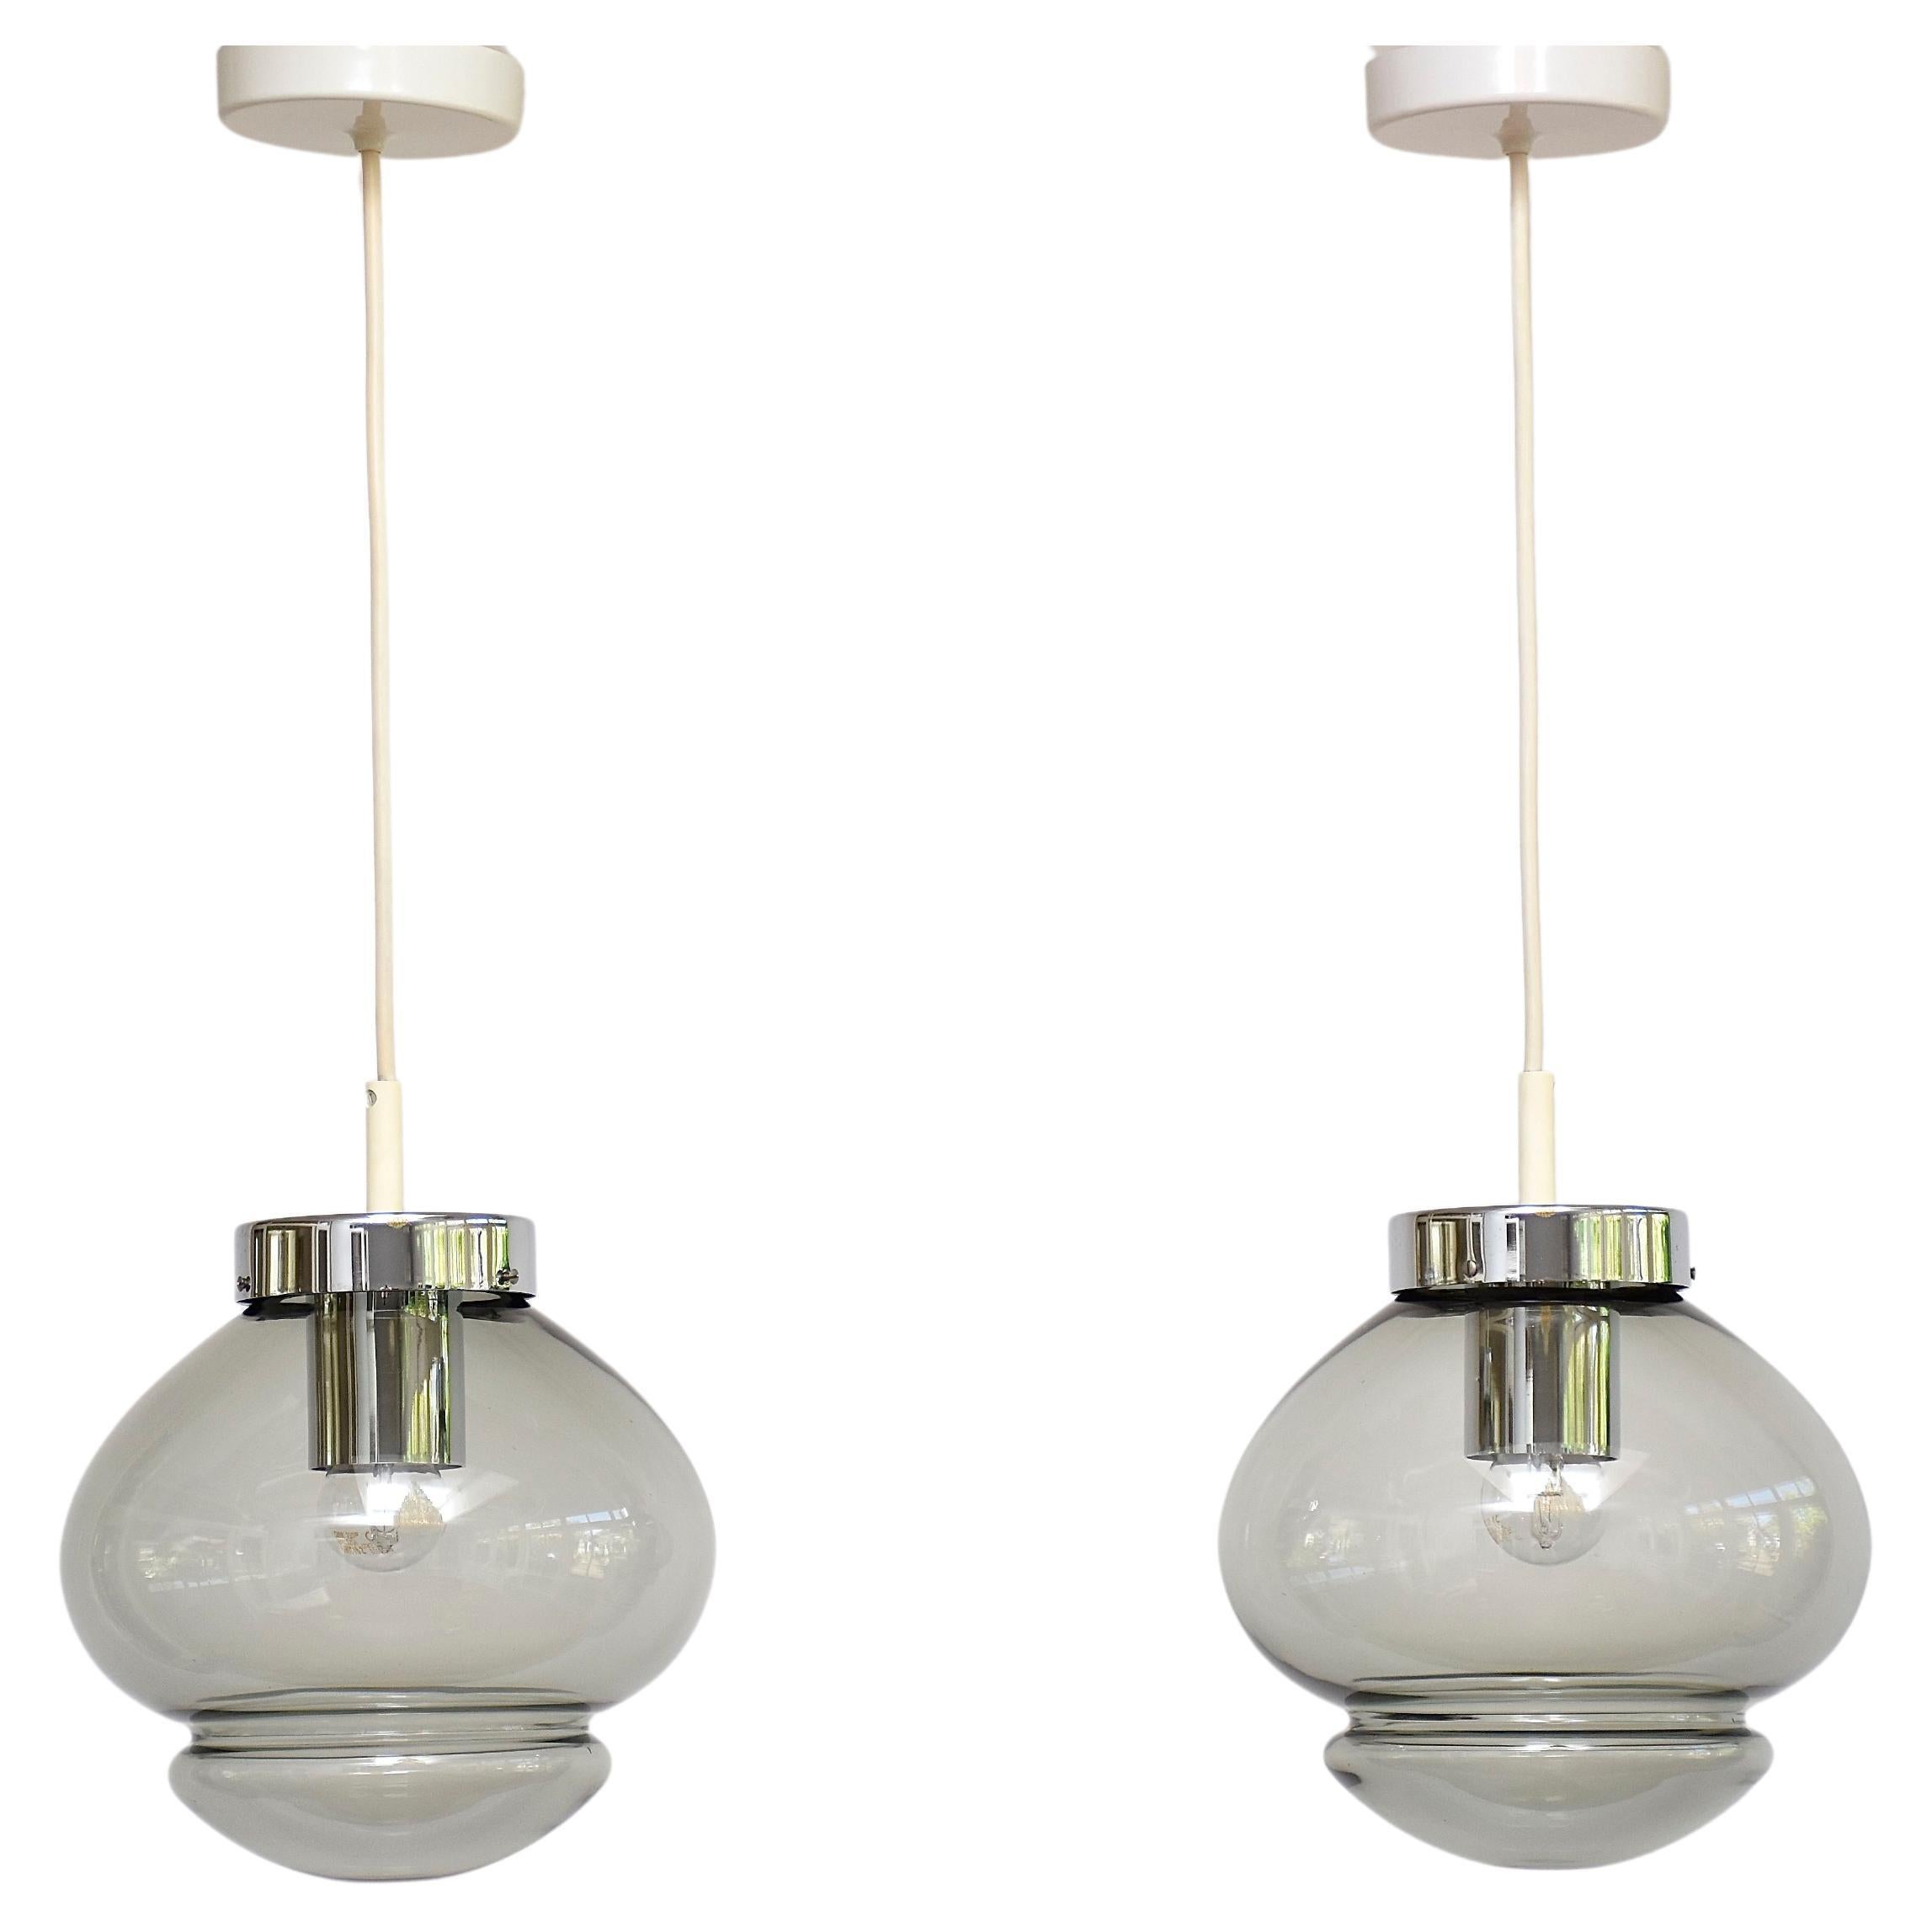 A paar of RAAK Amsterdam ceiling lamps For Sale